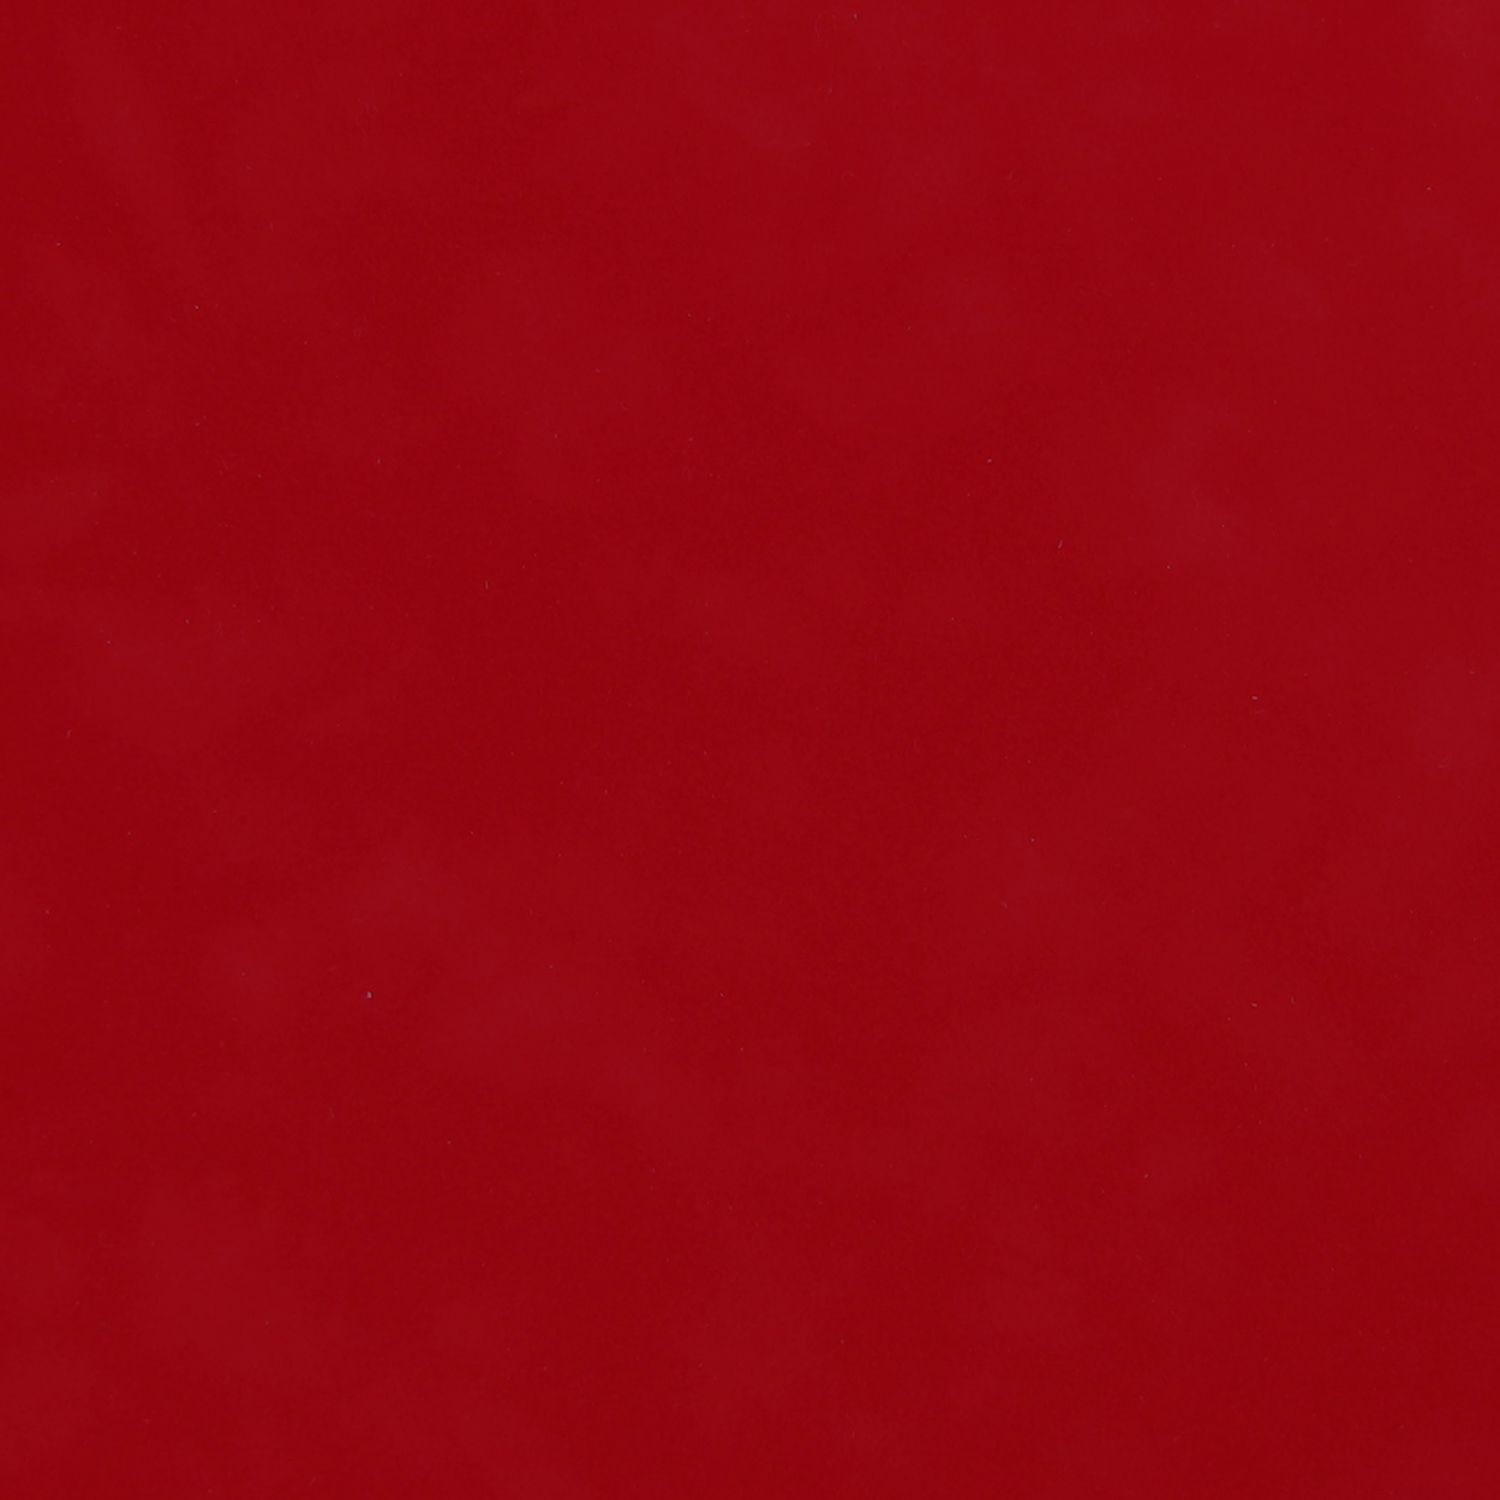 Get beautiful Photo background red colour online images for free